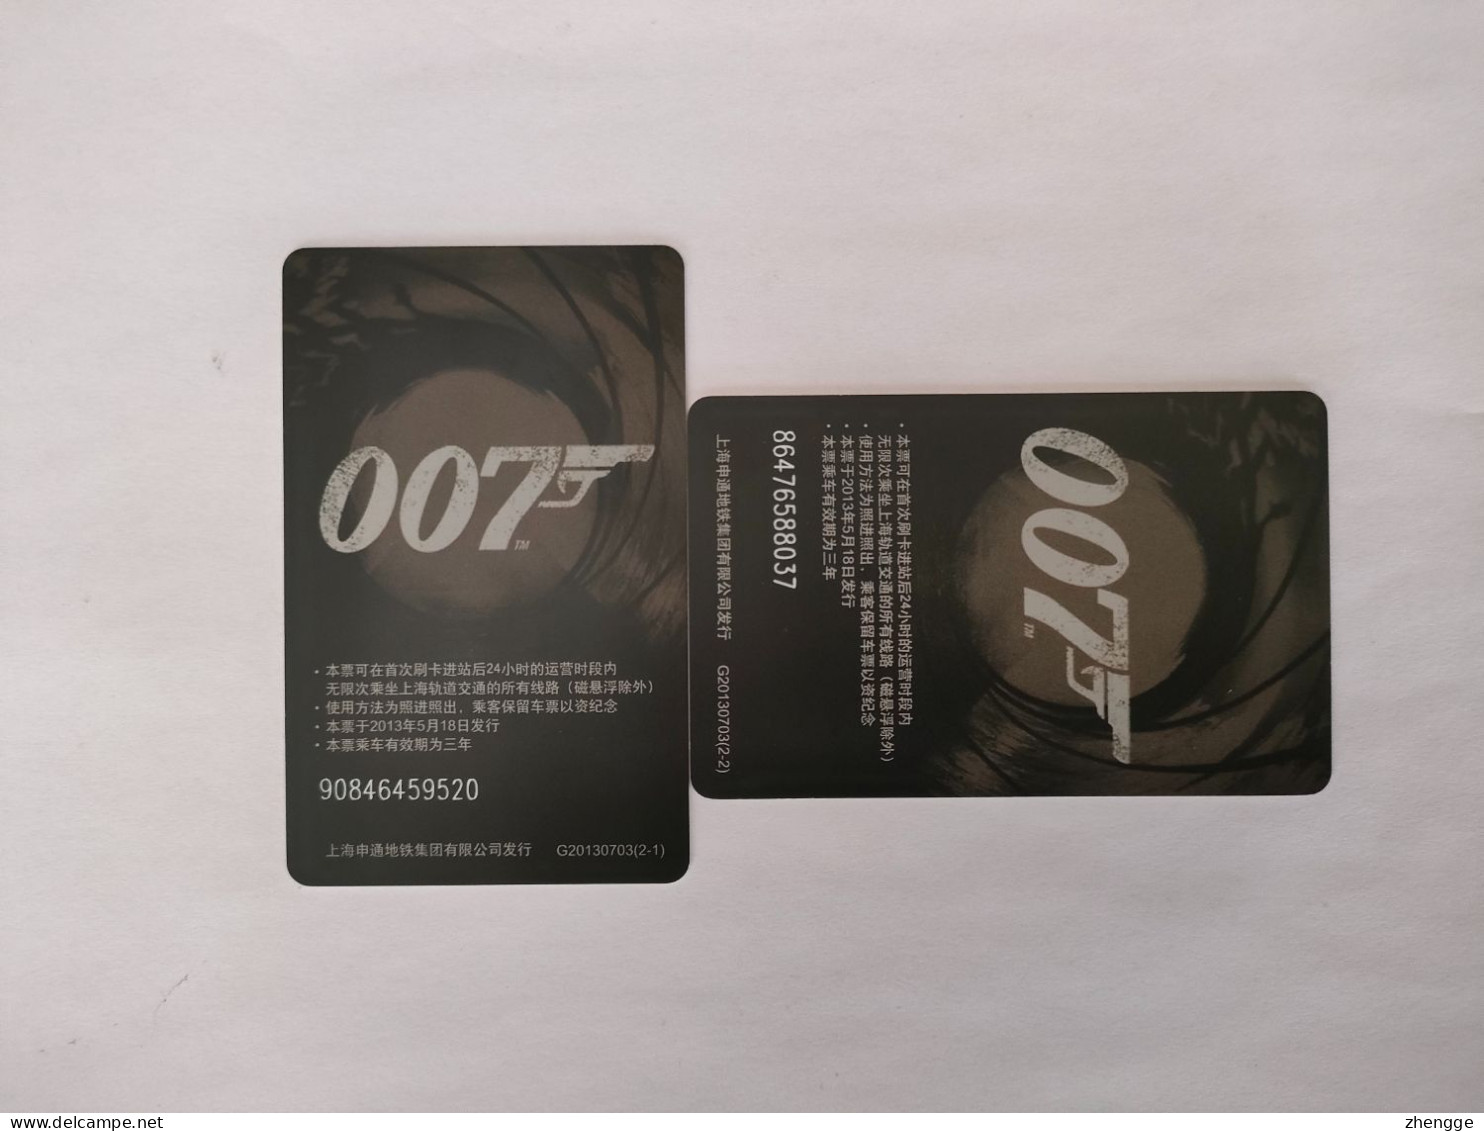 China Transport Cards, Movie,007, 50 Year Of Bond Style,metro Card, Shanghai City, 8000ex,(2pcs) - Unclassified